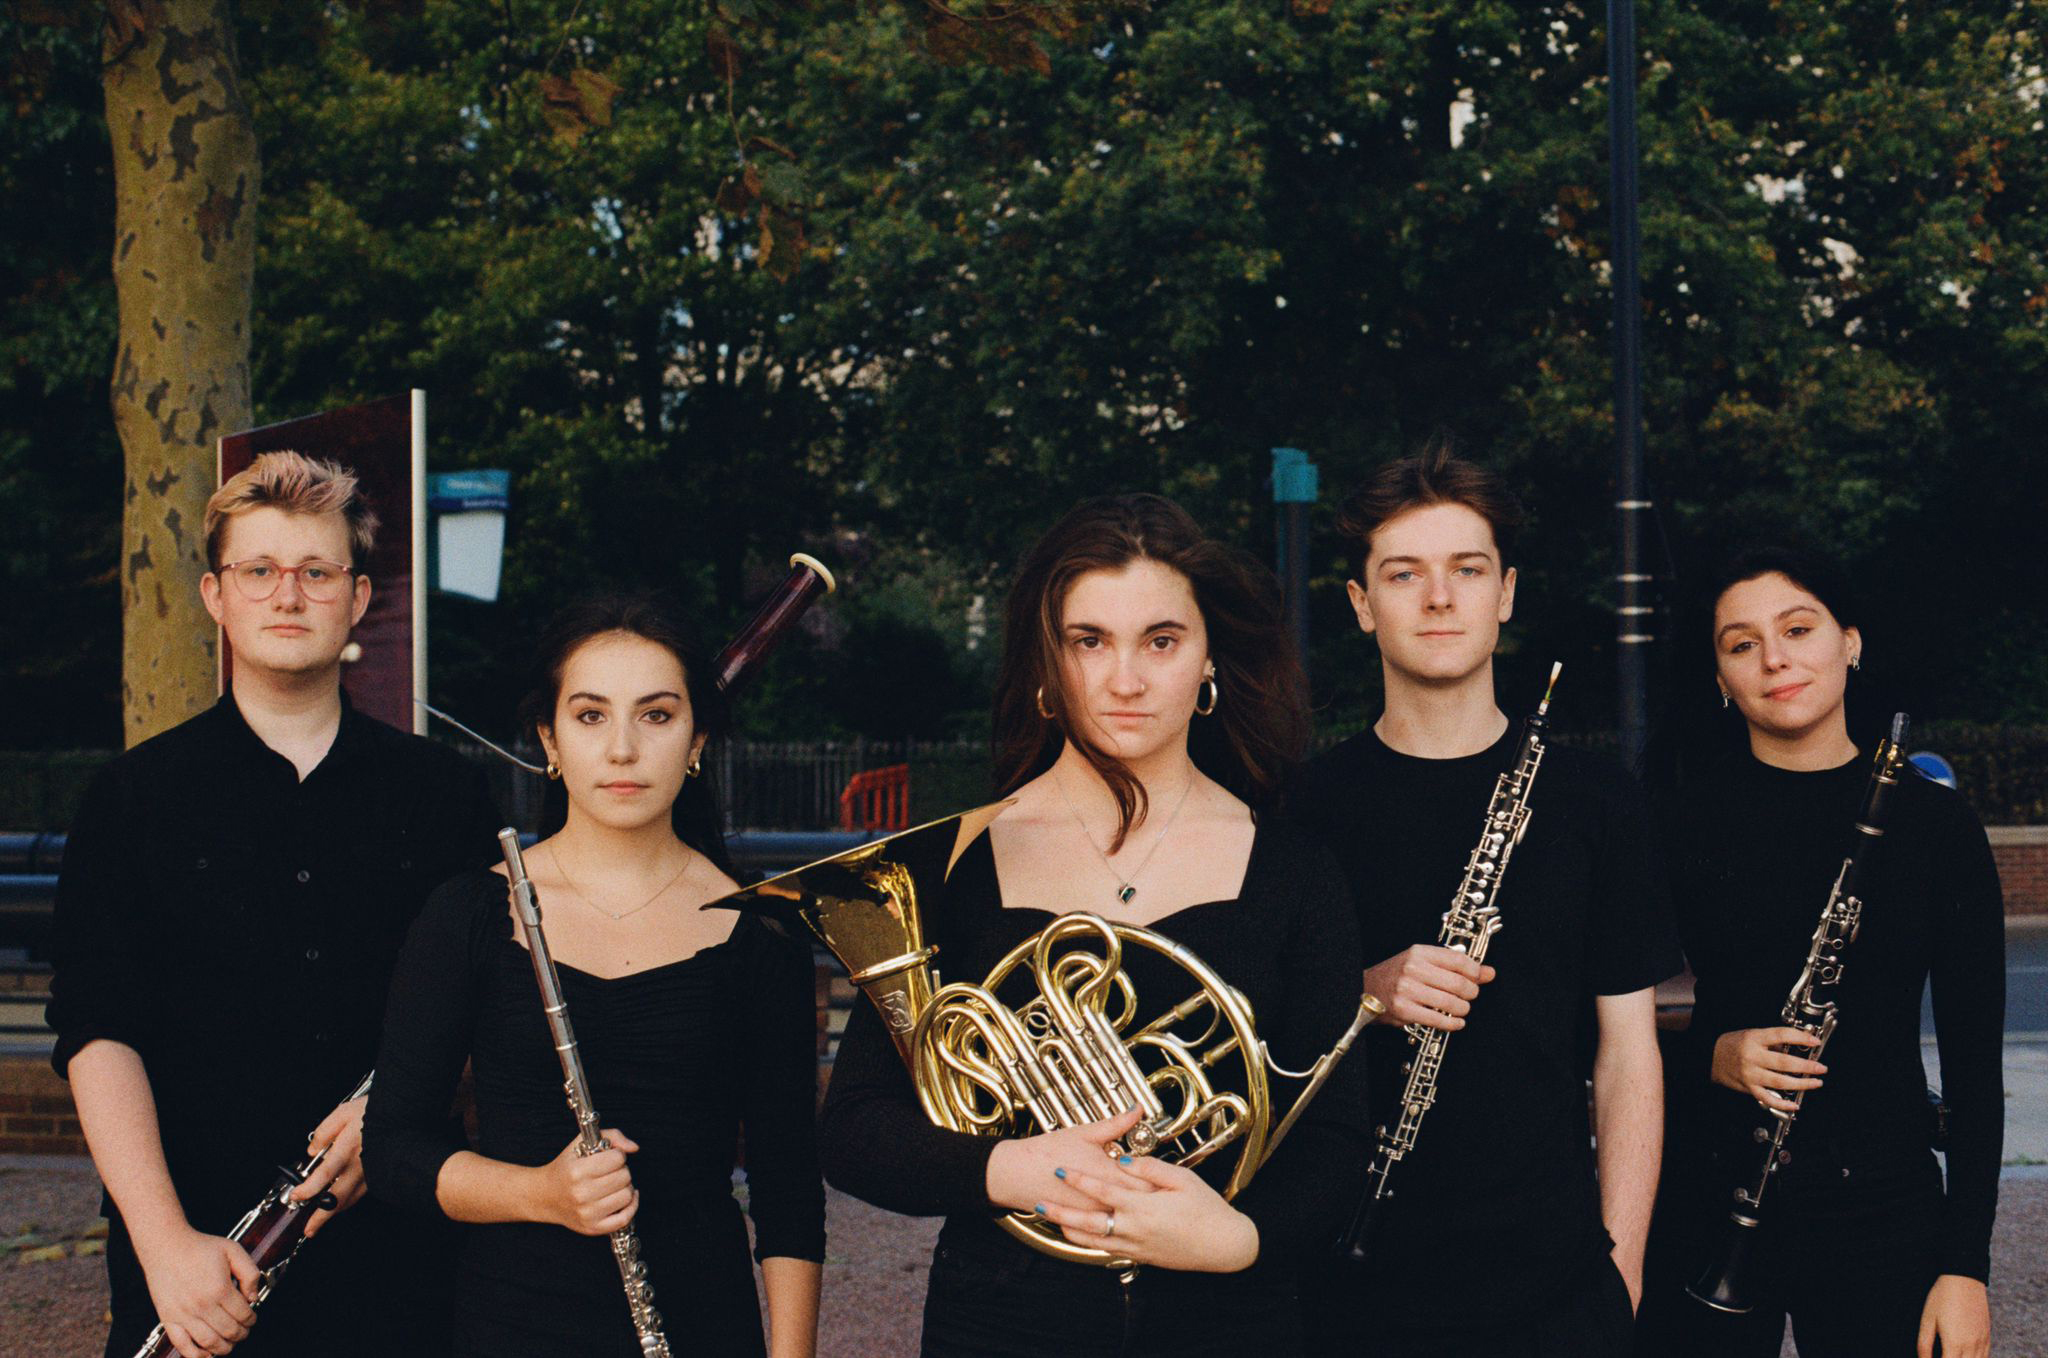 A photograph of the five members of Aeolian Winds wearing black, standing outside, holding their instruments and looking at the camera